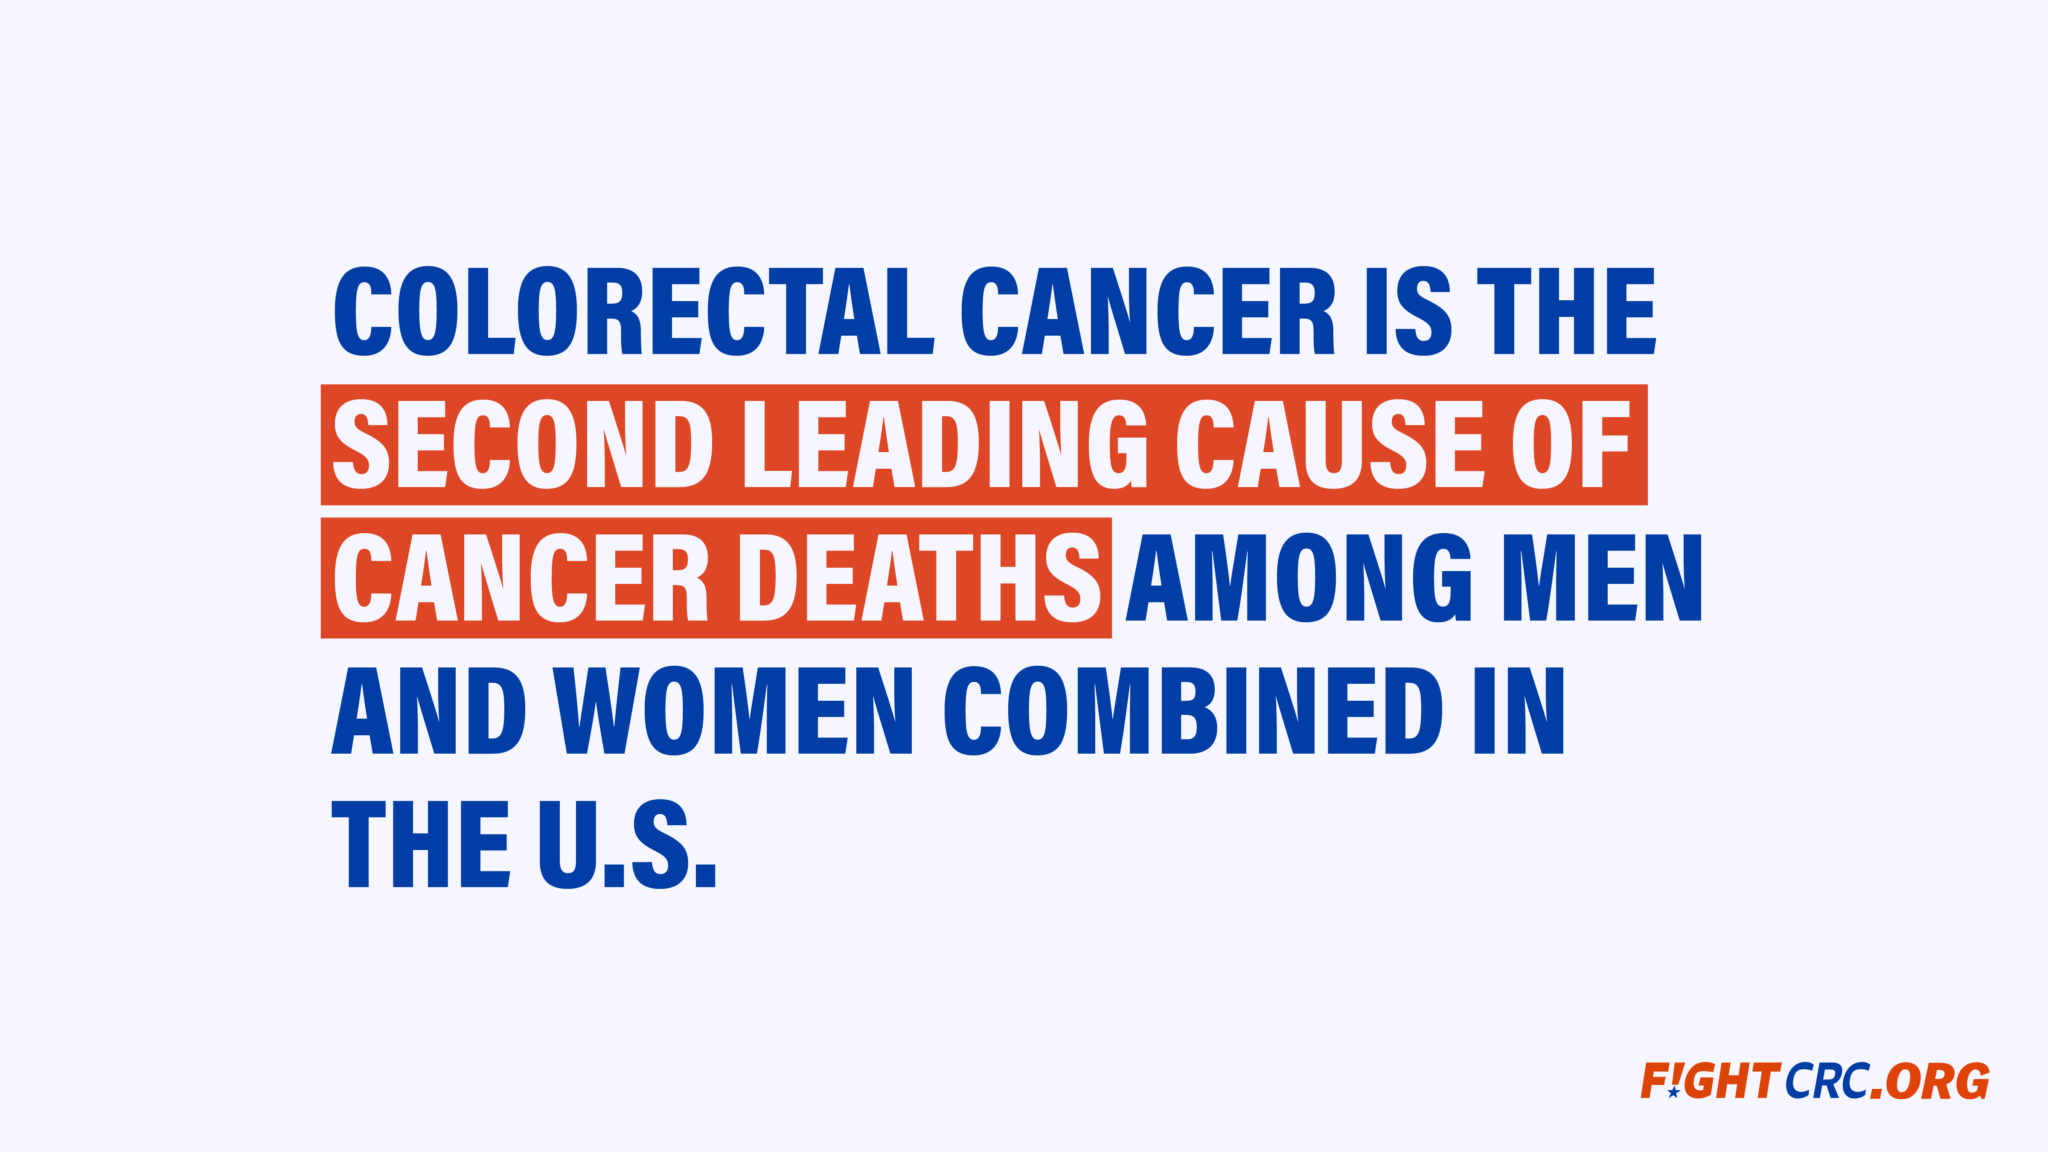 colon cancer is the second leading cause of cancer death